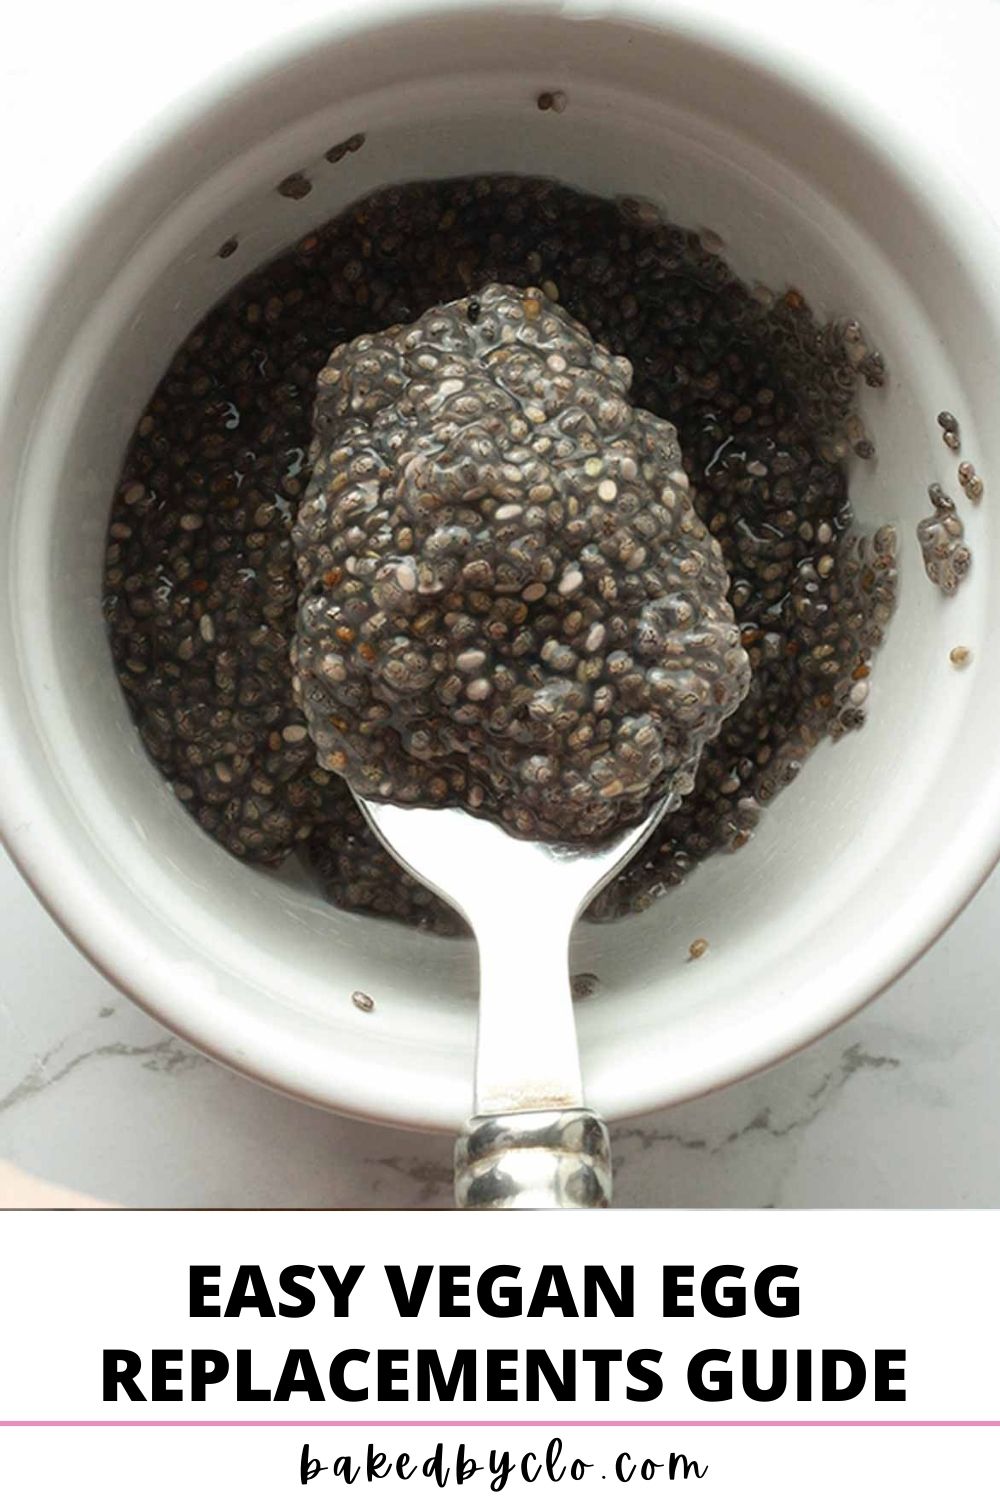 image of chia egg alongside text that reads "easy vegan egg replacements guide"